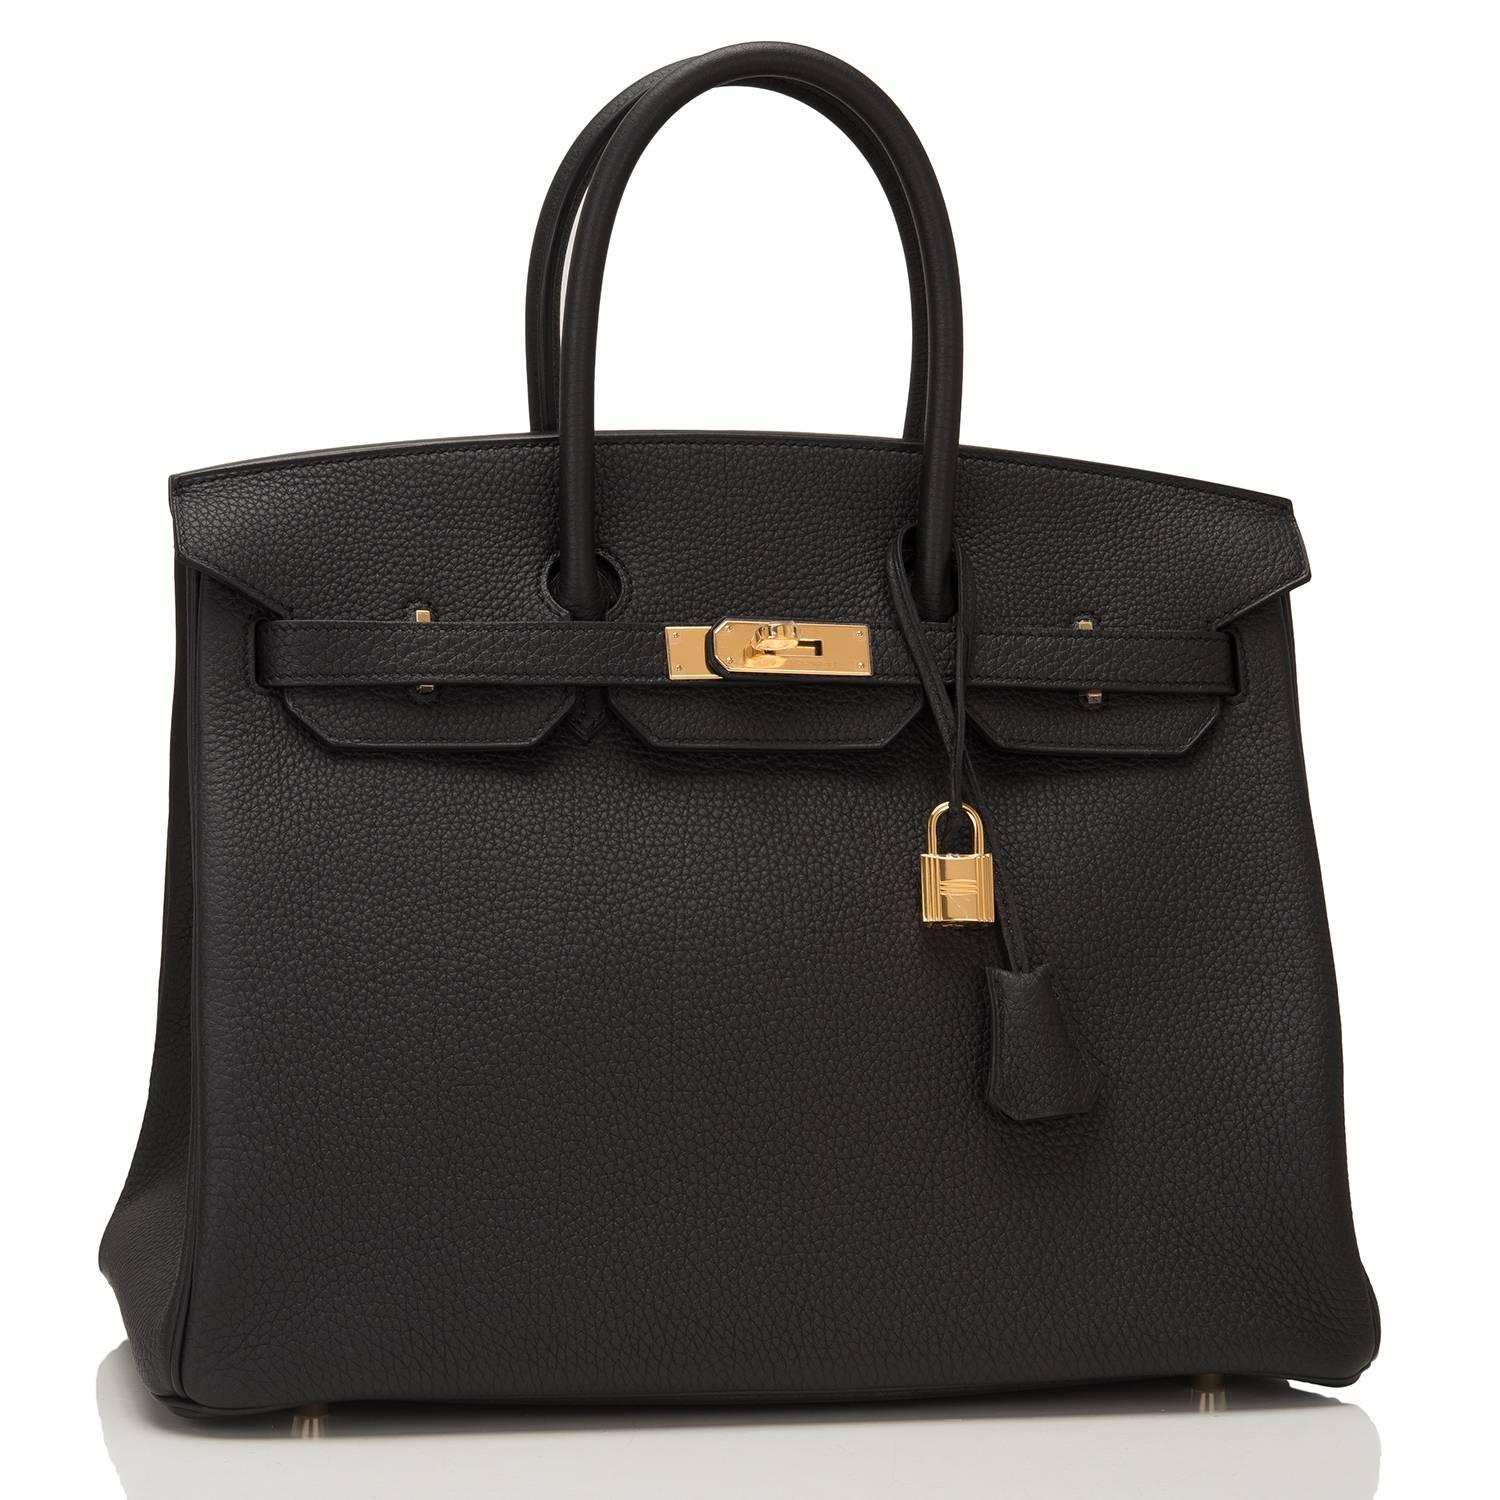 Hermes Black Birkin 35cm of togo leather with gold hardware.

This Birkin features tonal stitching, a front toggle closure, a clochette with lock and two keys, and double rolled handles.

The interior is lined with black chevre and has one zip